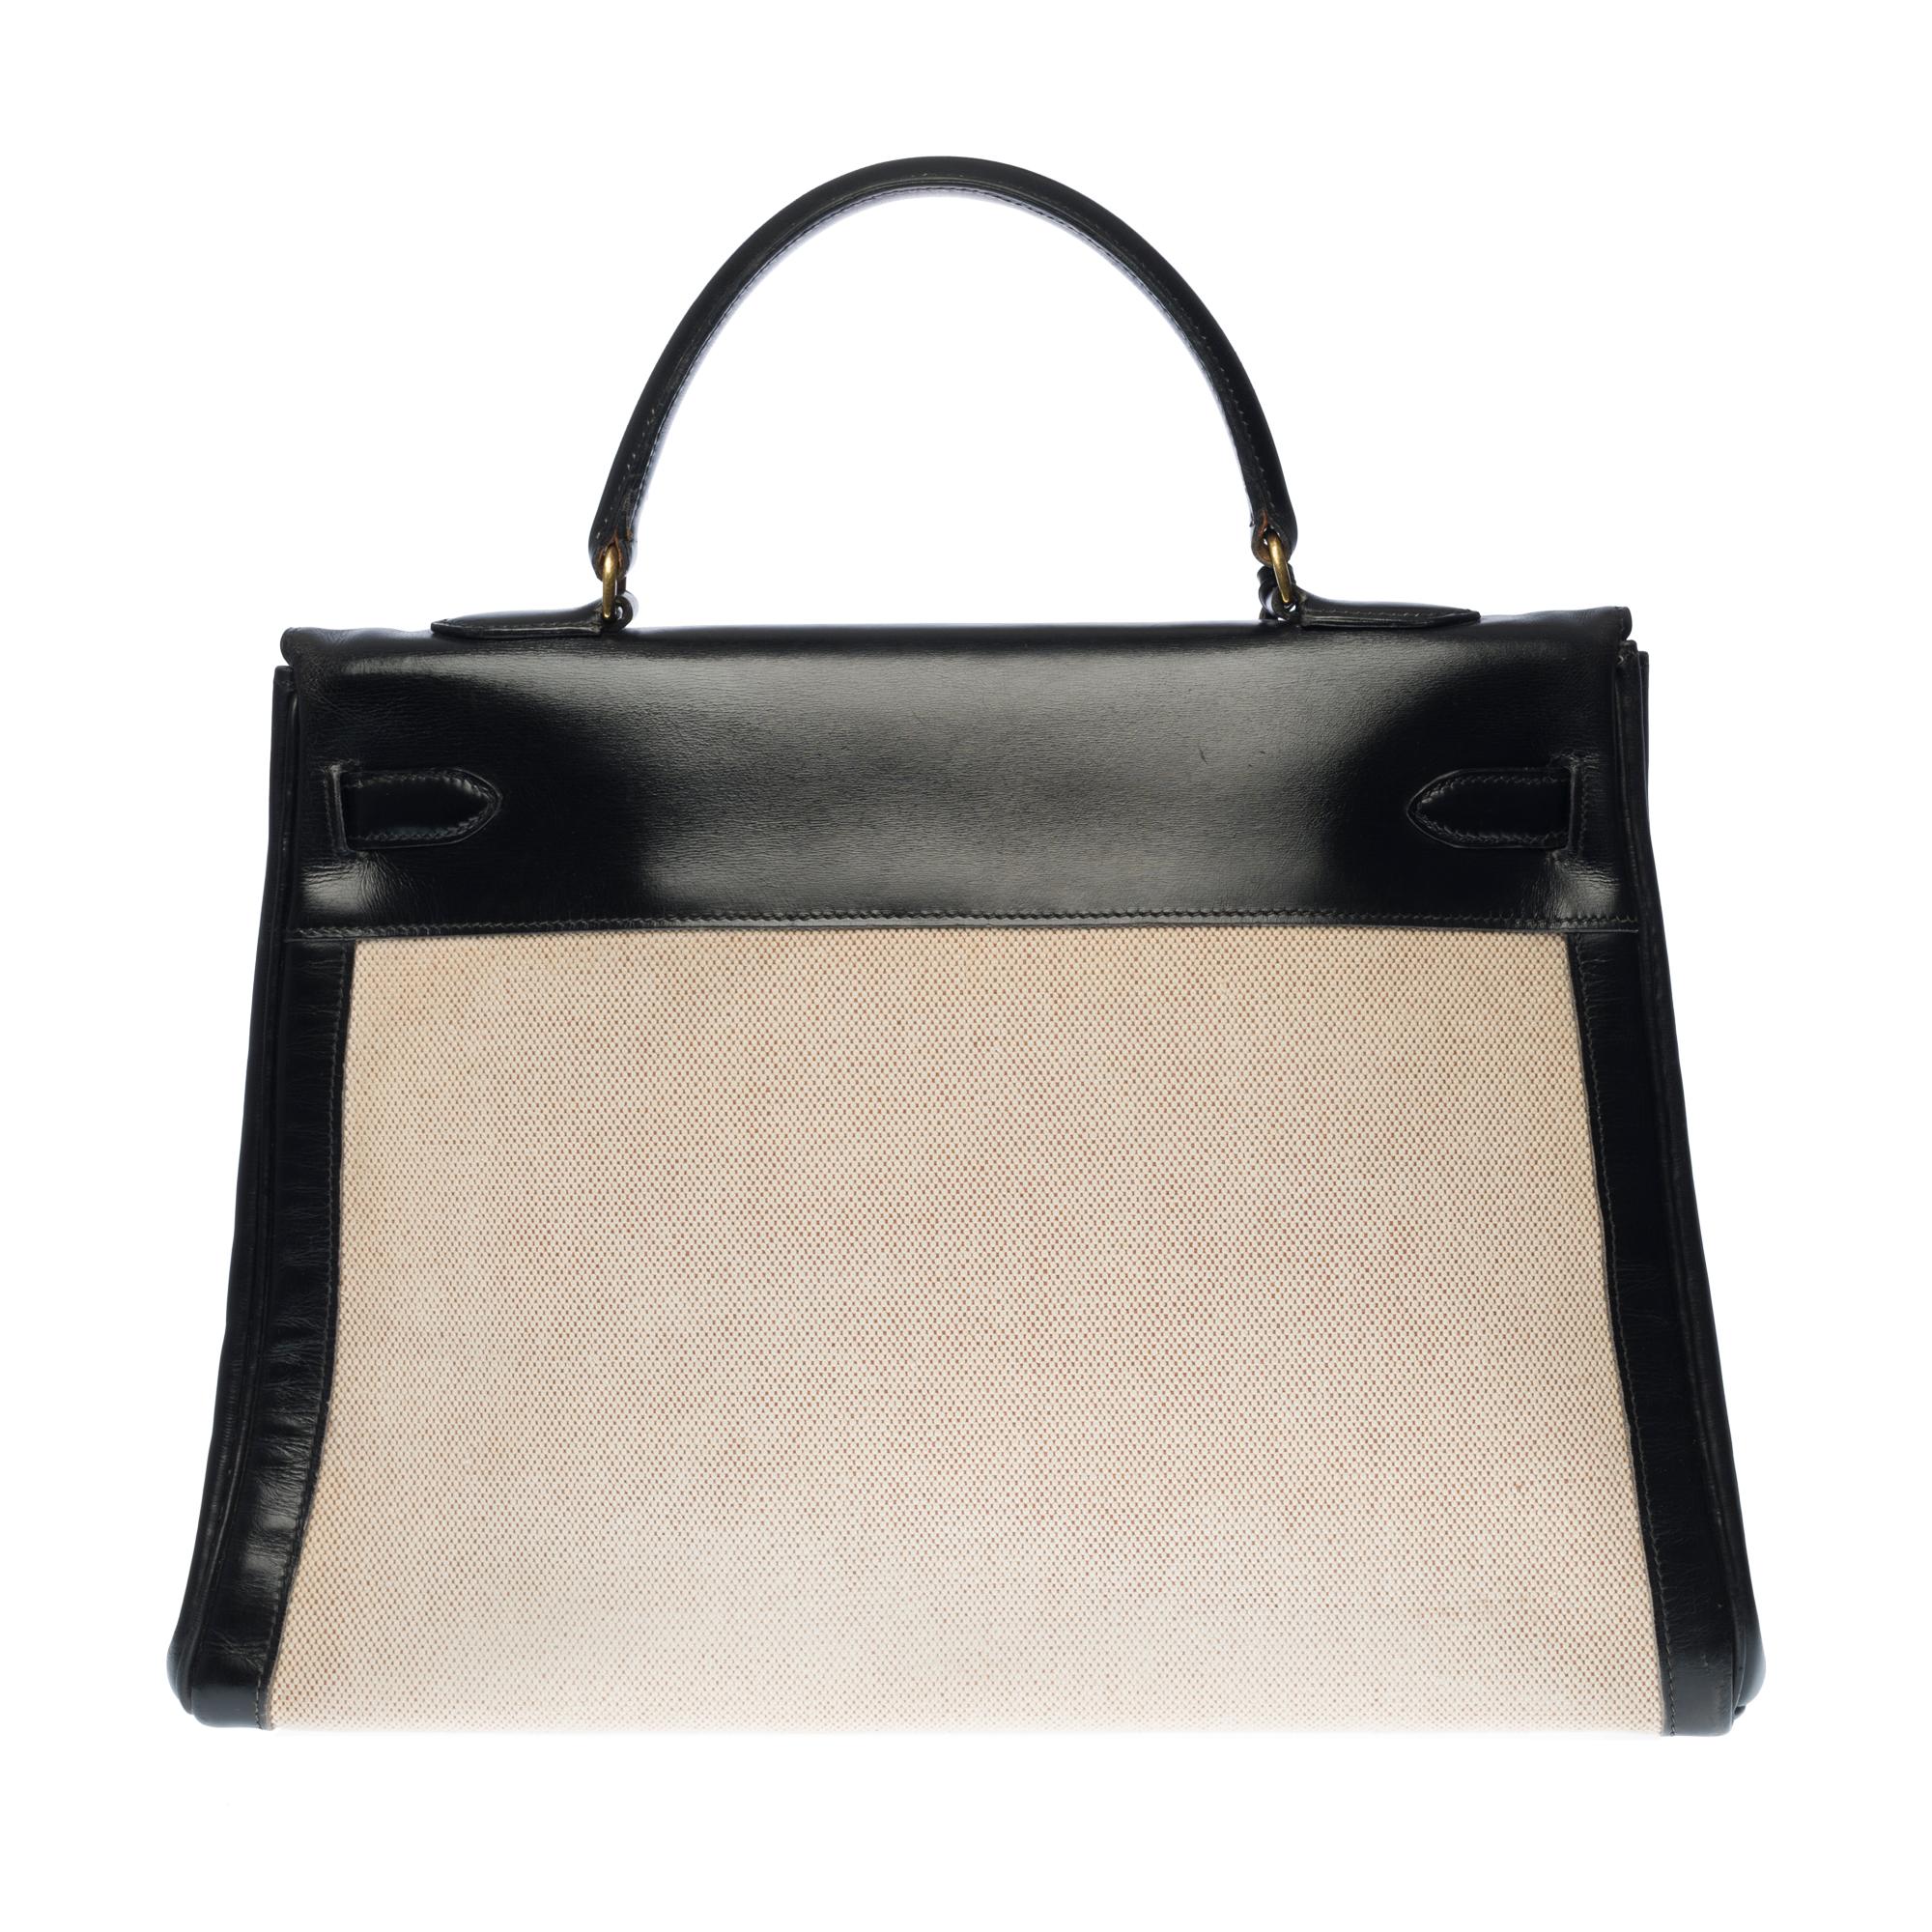 Gorgeous Hermes Kelly 35 cm handbag in black box calfskin leather and beige canvas, gold metal hardware, black leather handle, a removable strap in black leather box (not signed Hermès) allowing a hand or shoulder support.

Closure by flap.
Lining